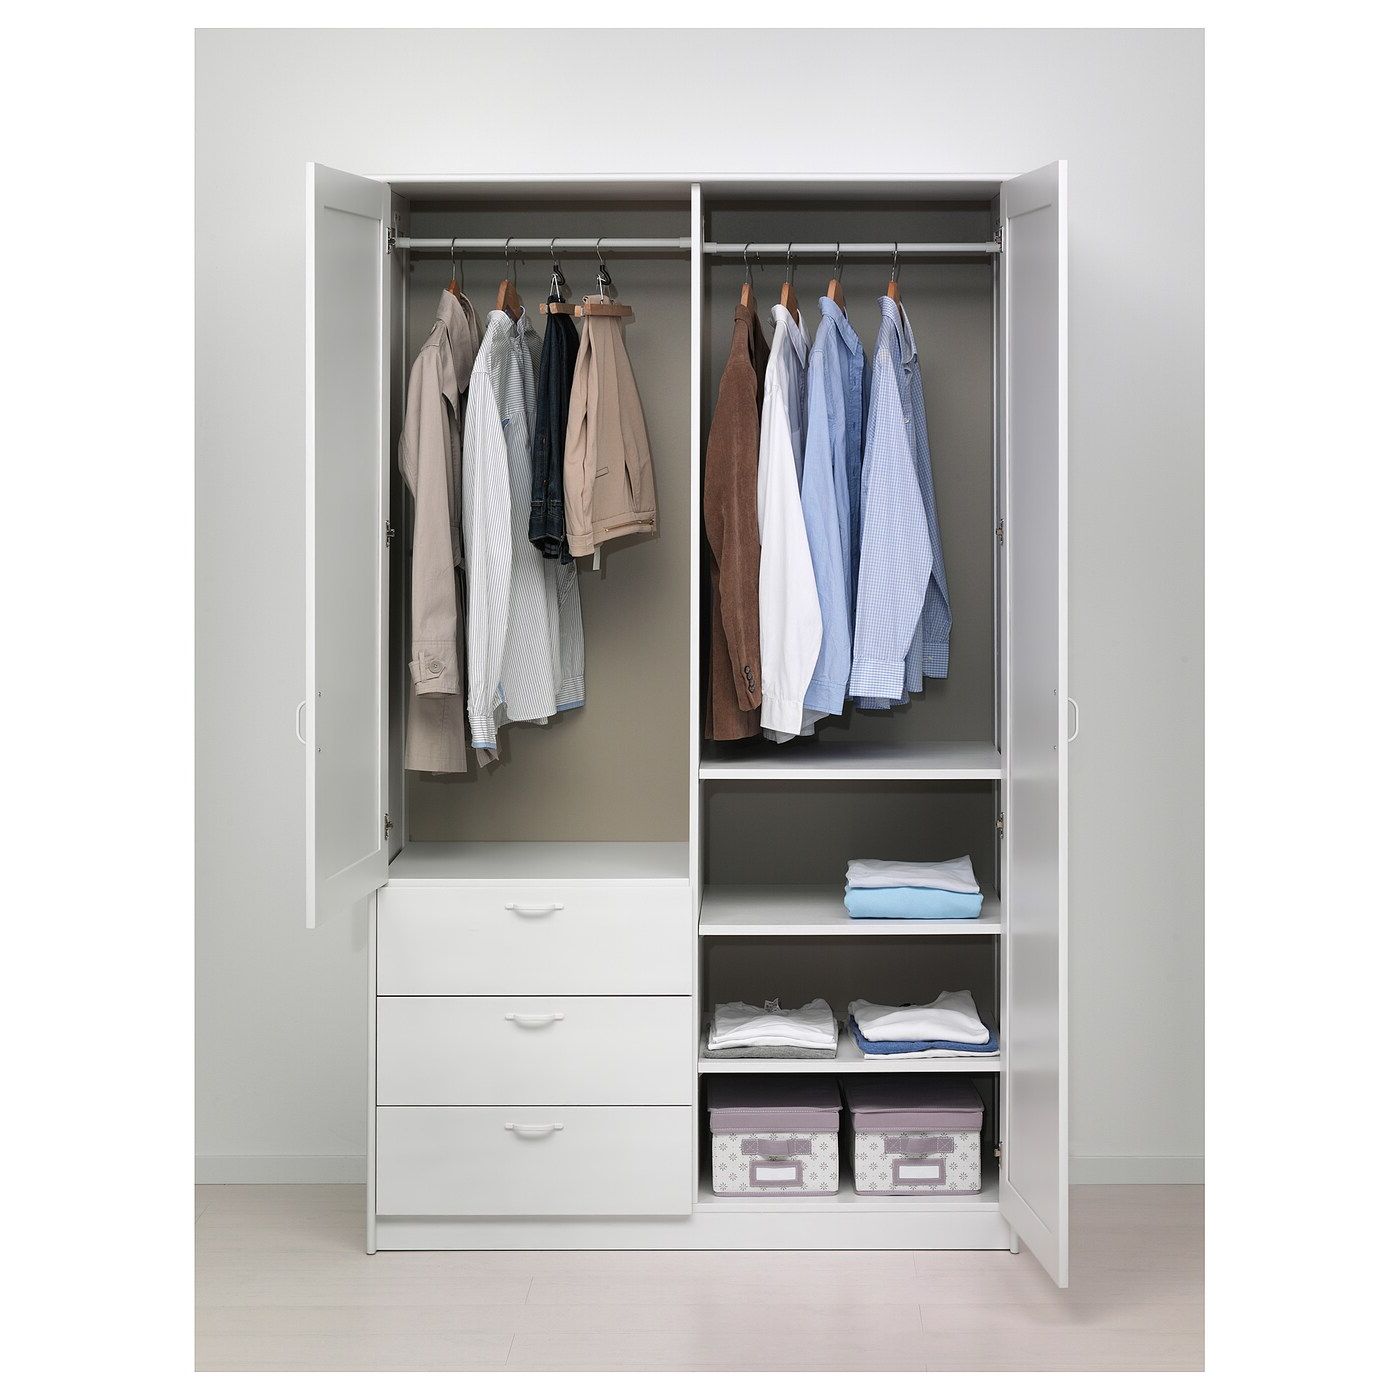 Musken Wardrobe With 2 Doors+3 Drawers, White, 124x60x201 Cm – Ikea Inside Wardrobes Drawers And Shelves Ikea (Gallery 7 of 20)